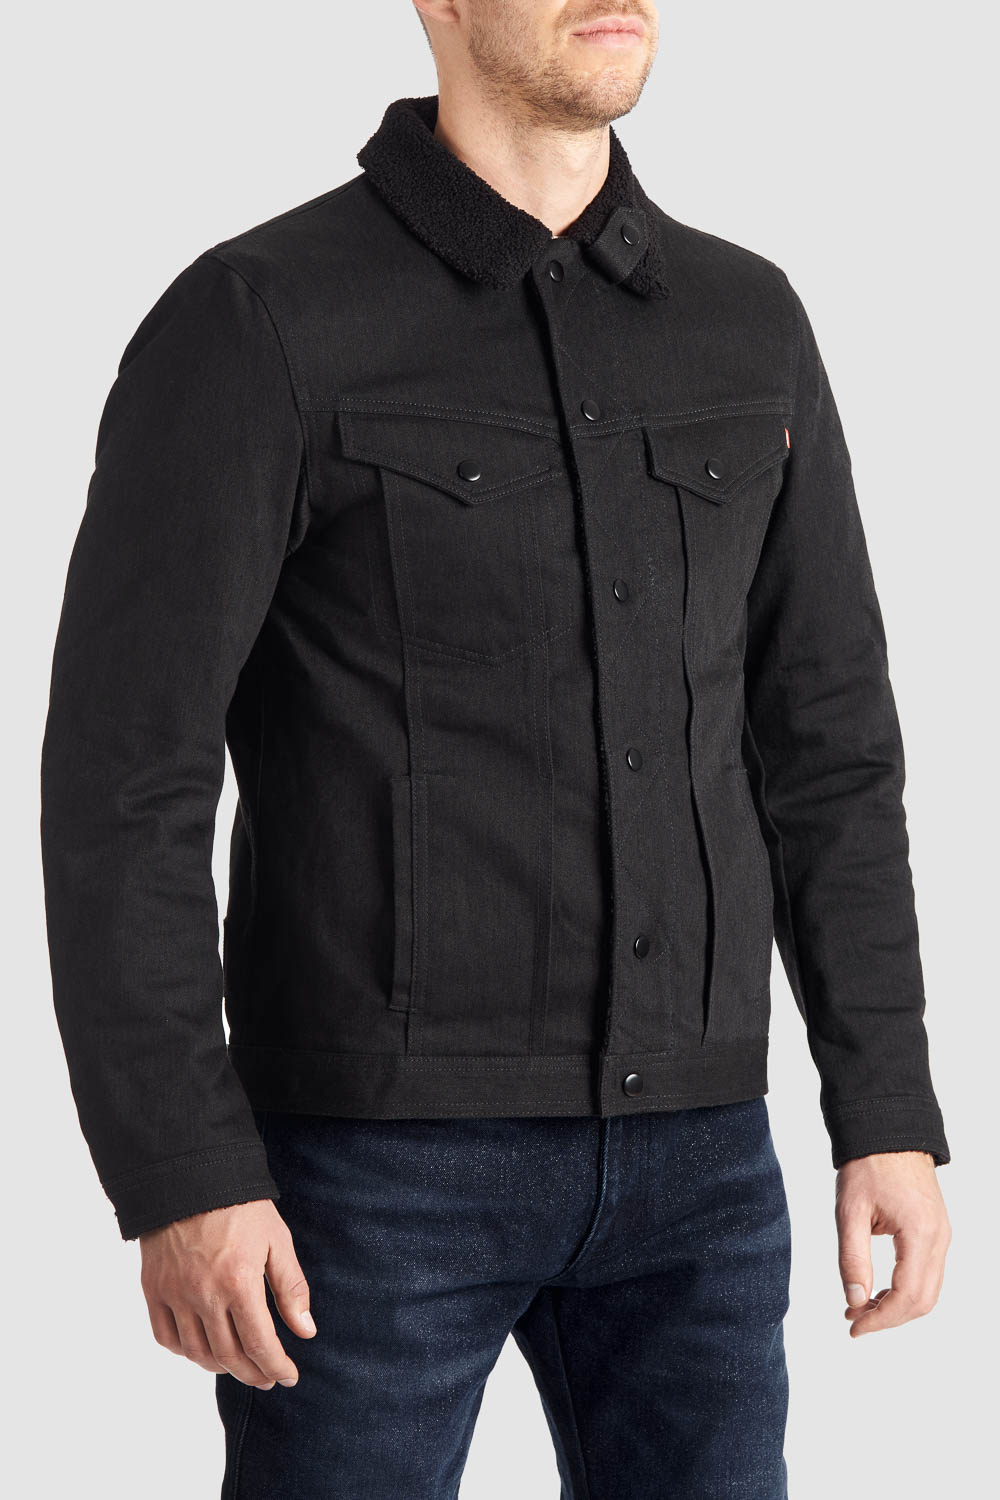 Sherpa Trucker Motorcycle Jacket for Riders